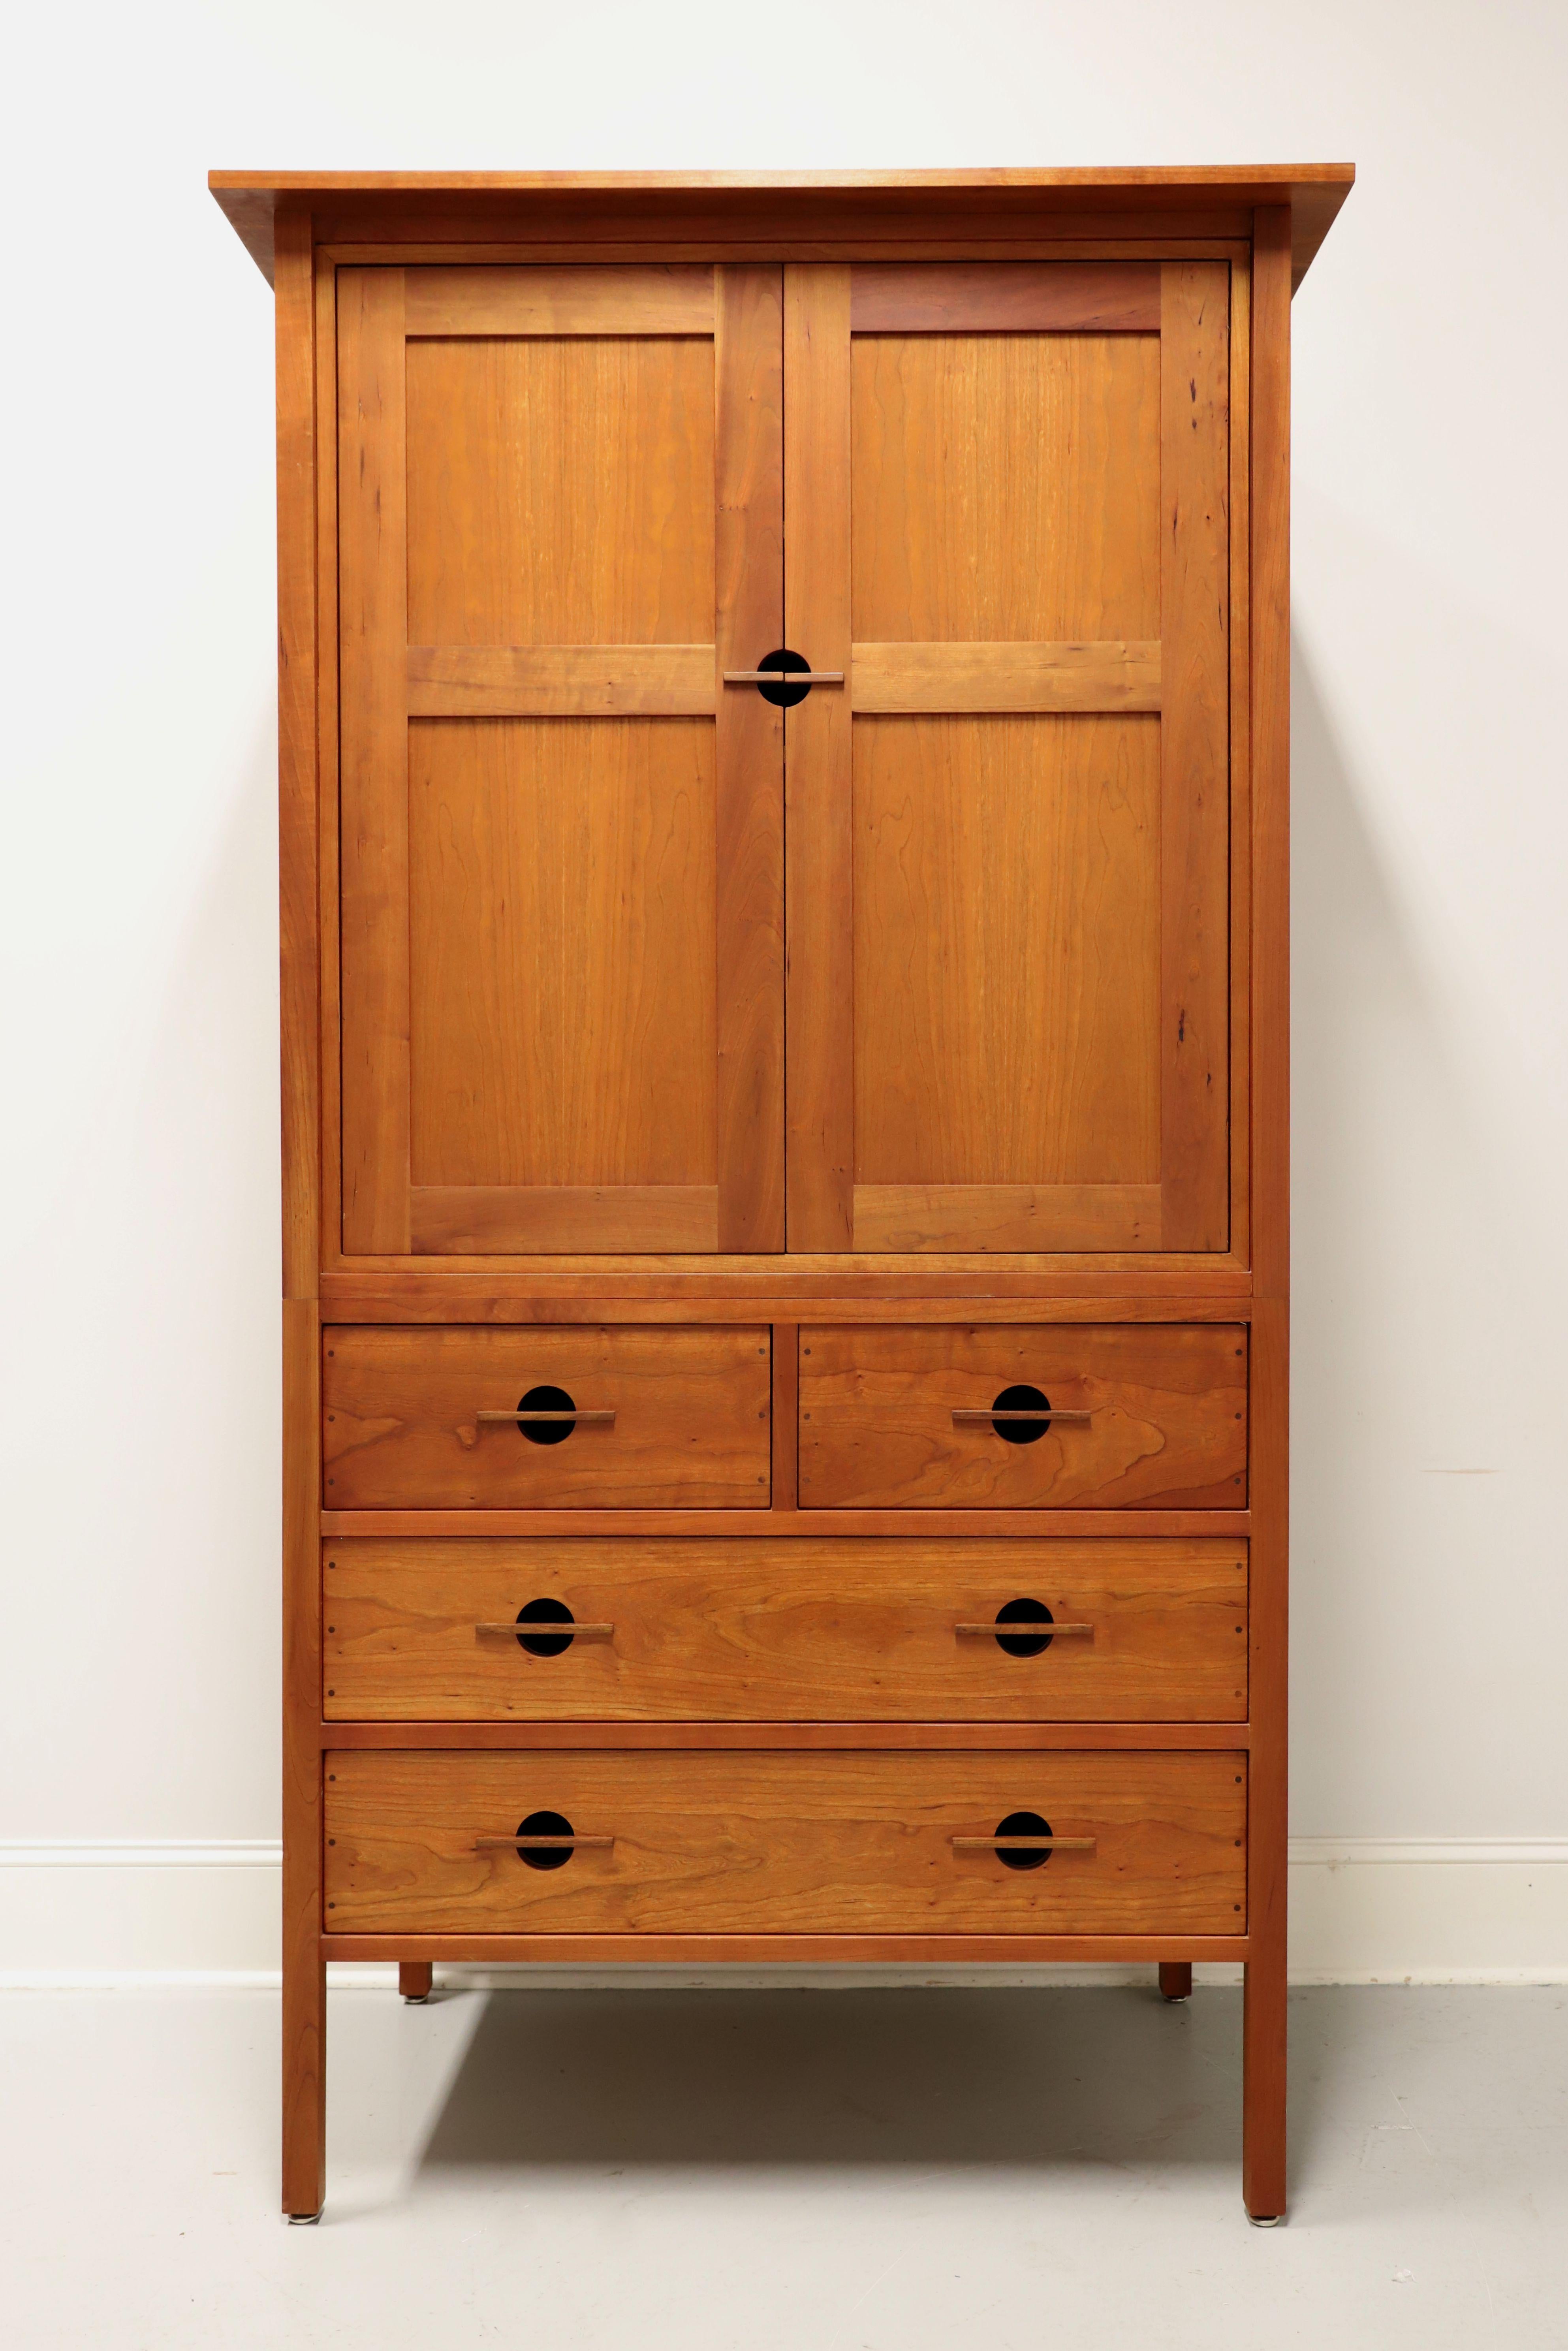 A Mission / Arts & Crafts style wardrobe by John Kelly Furniture, the J-36A Armoire Wardrobe, from their J1 Series. Solid black cherry with black walnut peg detailing to drawers, square edge overhanging top, plank style panel doors, signature